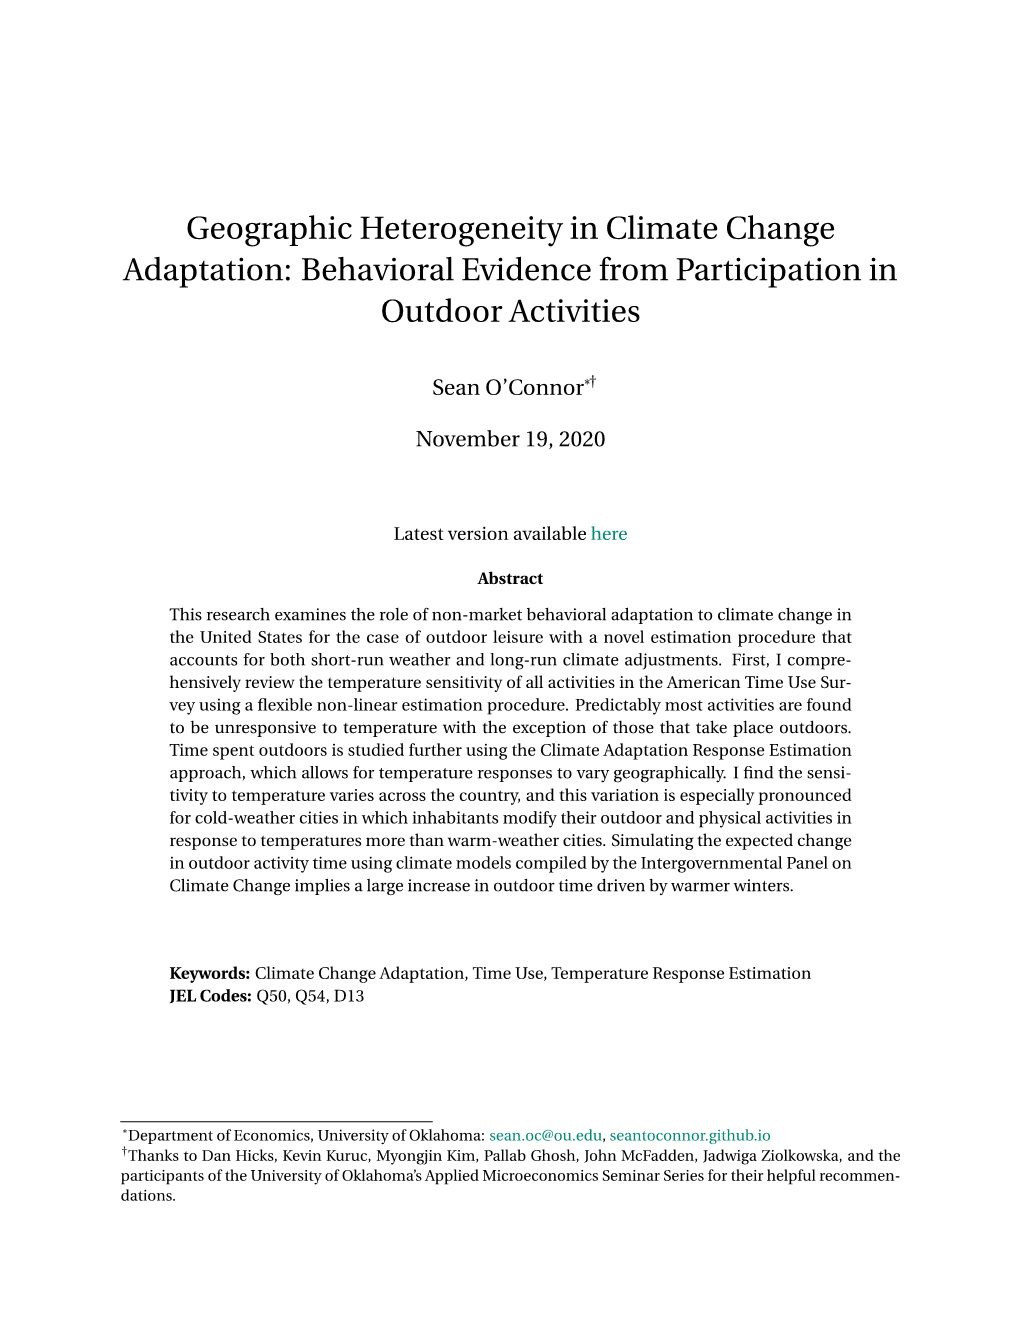 Geographic Heterogeneity in Climate Change Adaptation: Behavioral Evidence from Participation in Outdoor Activities